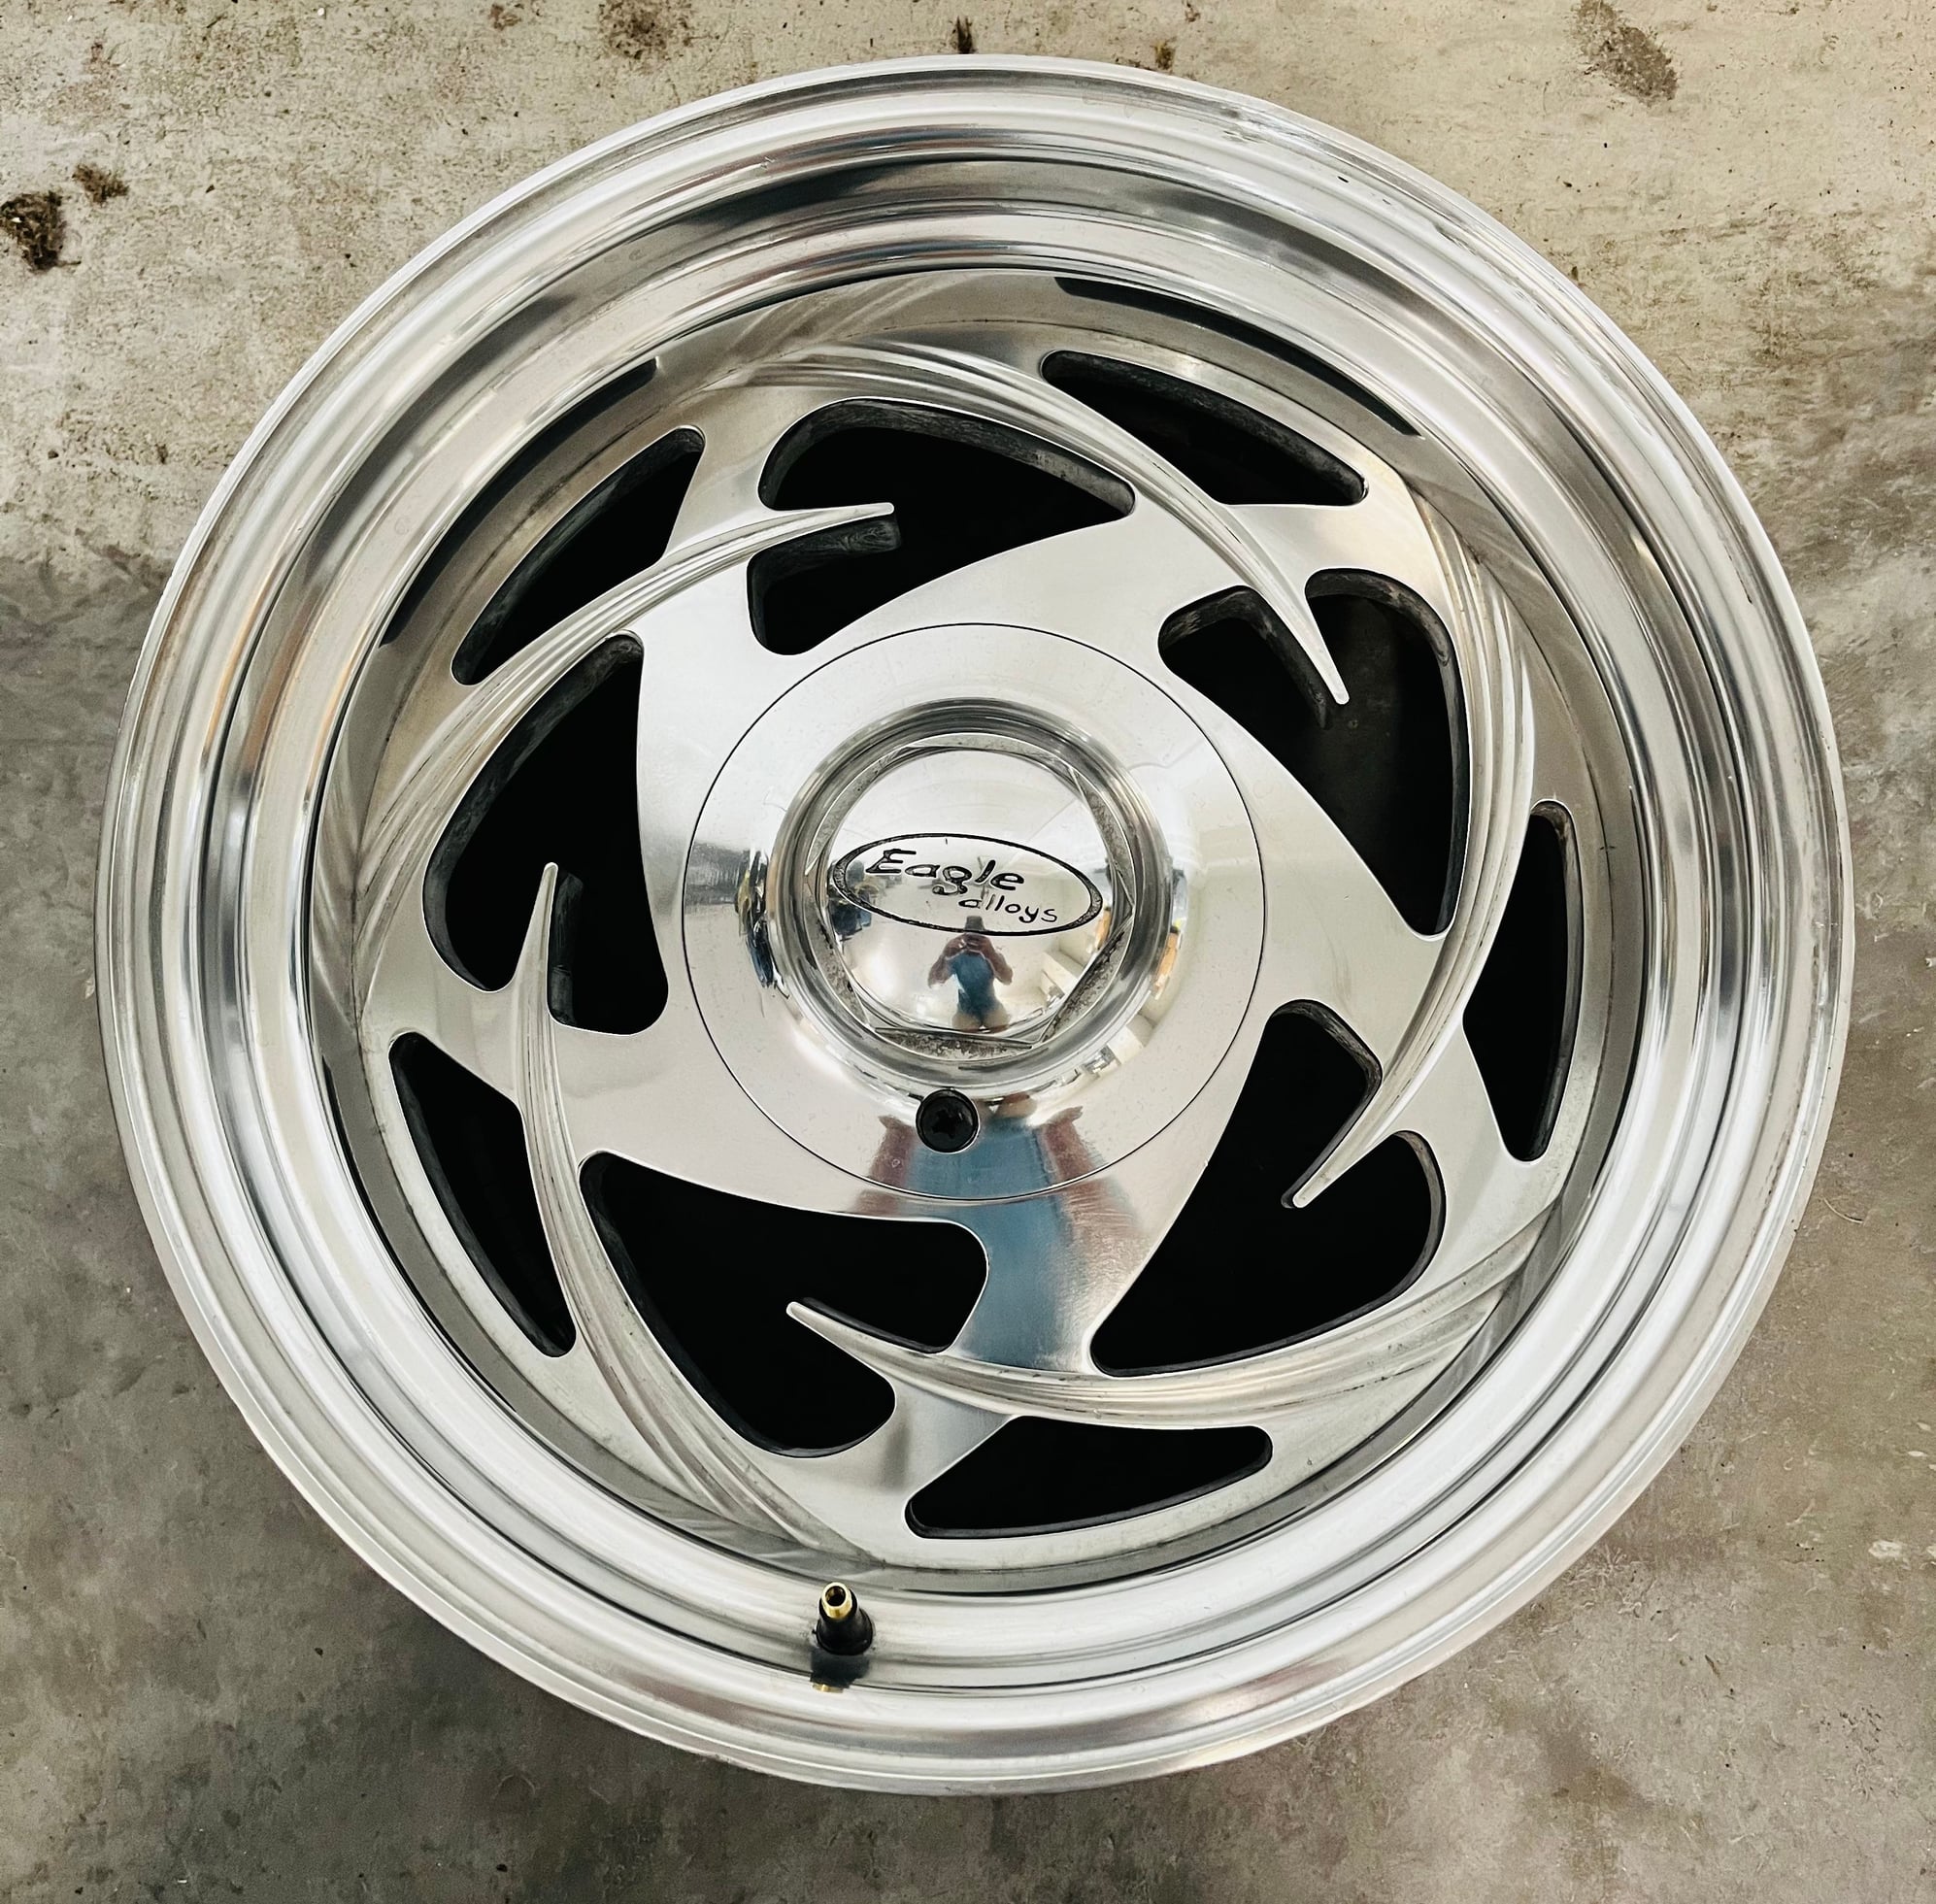 Wheels and Tires/Axles - Eagle Alloys series 203 - Used - All Years Chevrolet All Models - St. Cloud, FL 34769, United States